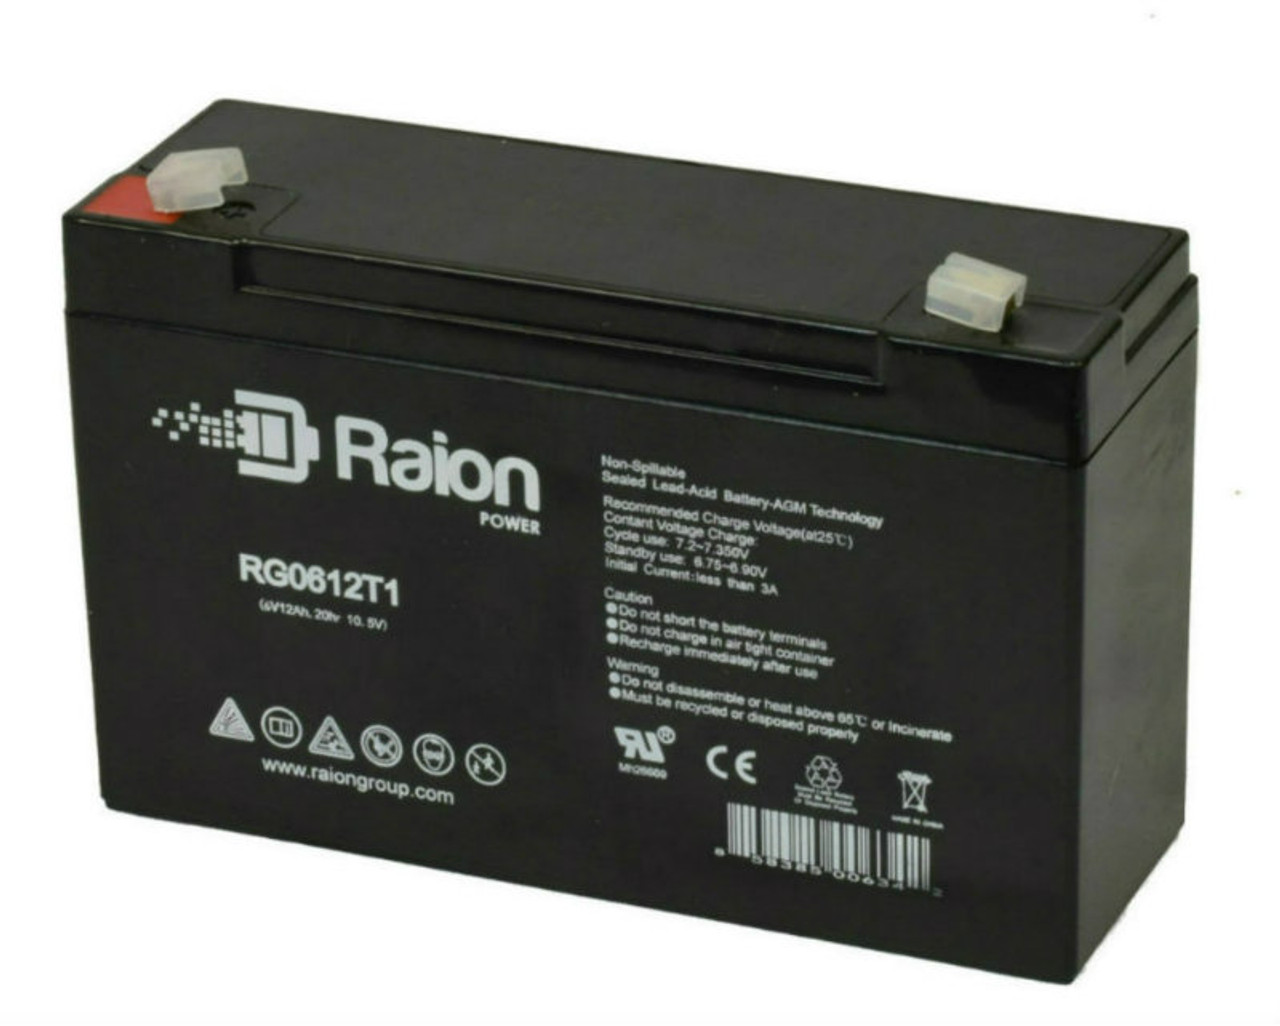 Raion Power RG06120T1 Replacement Battery for Flying Power NOS6-12